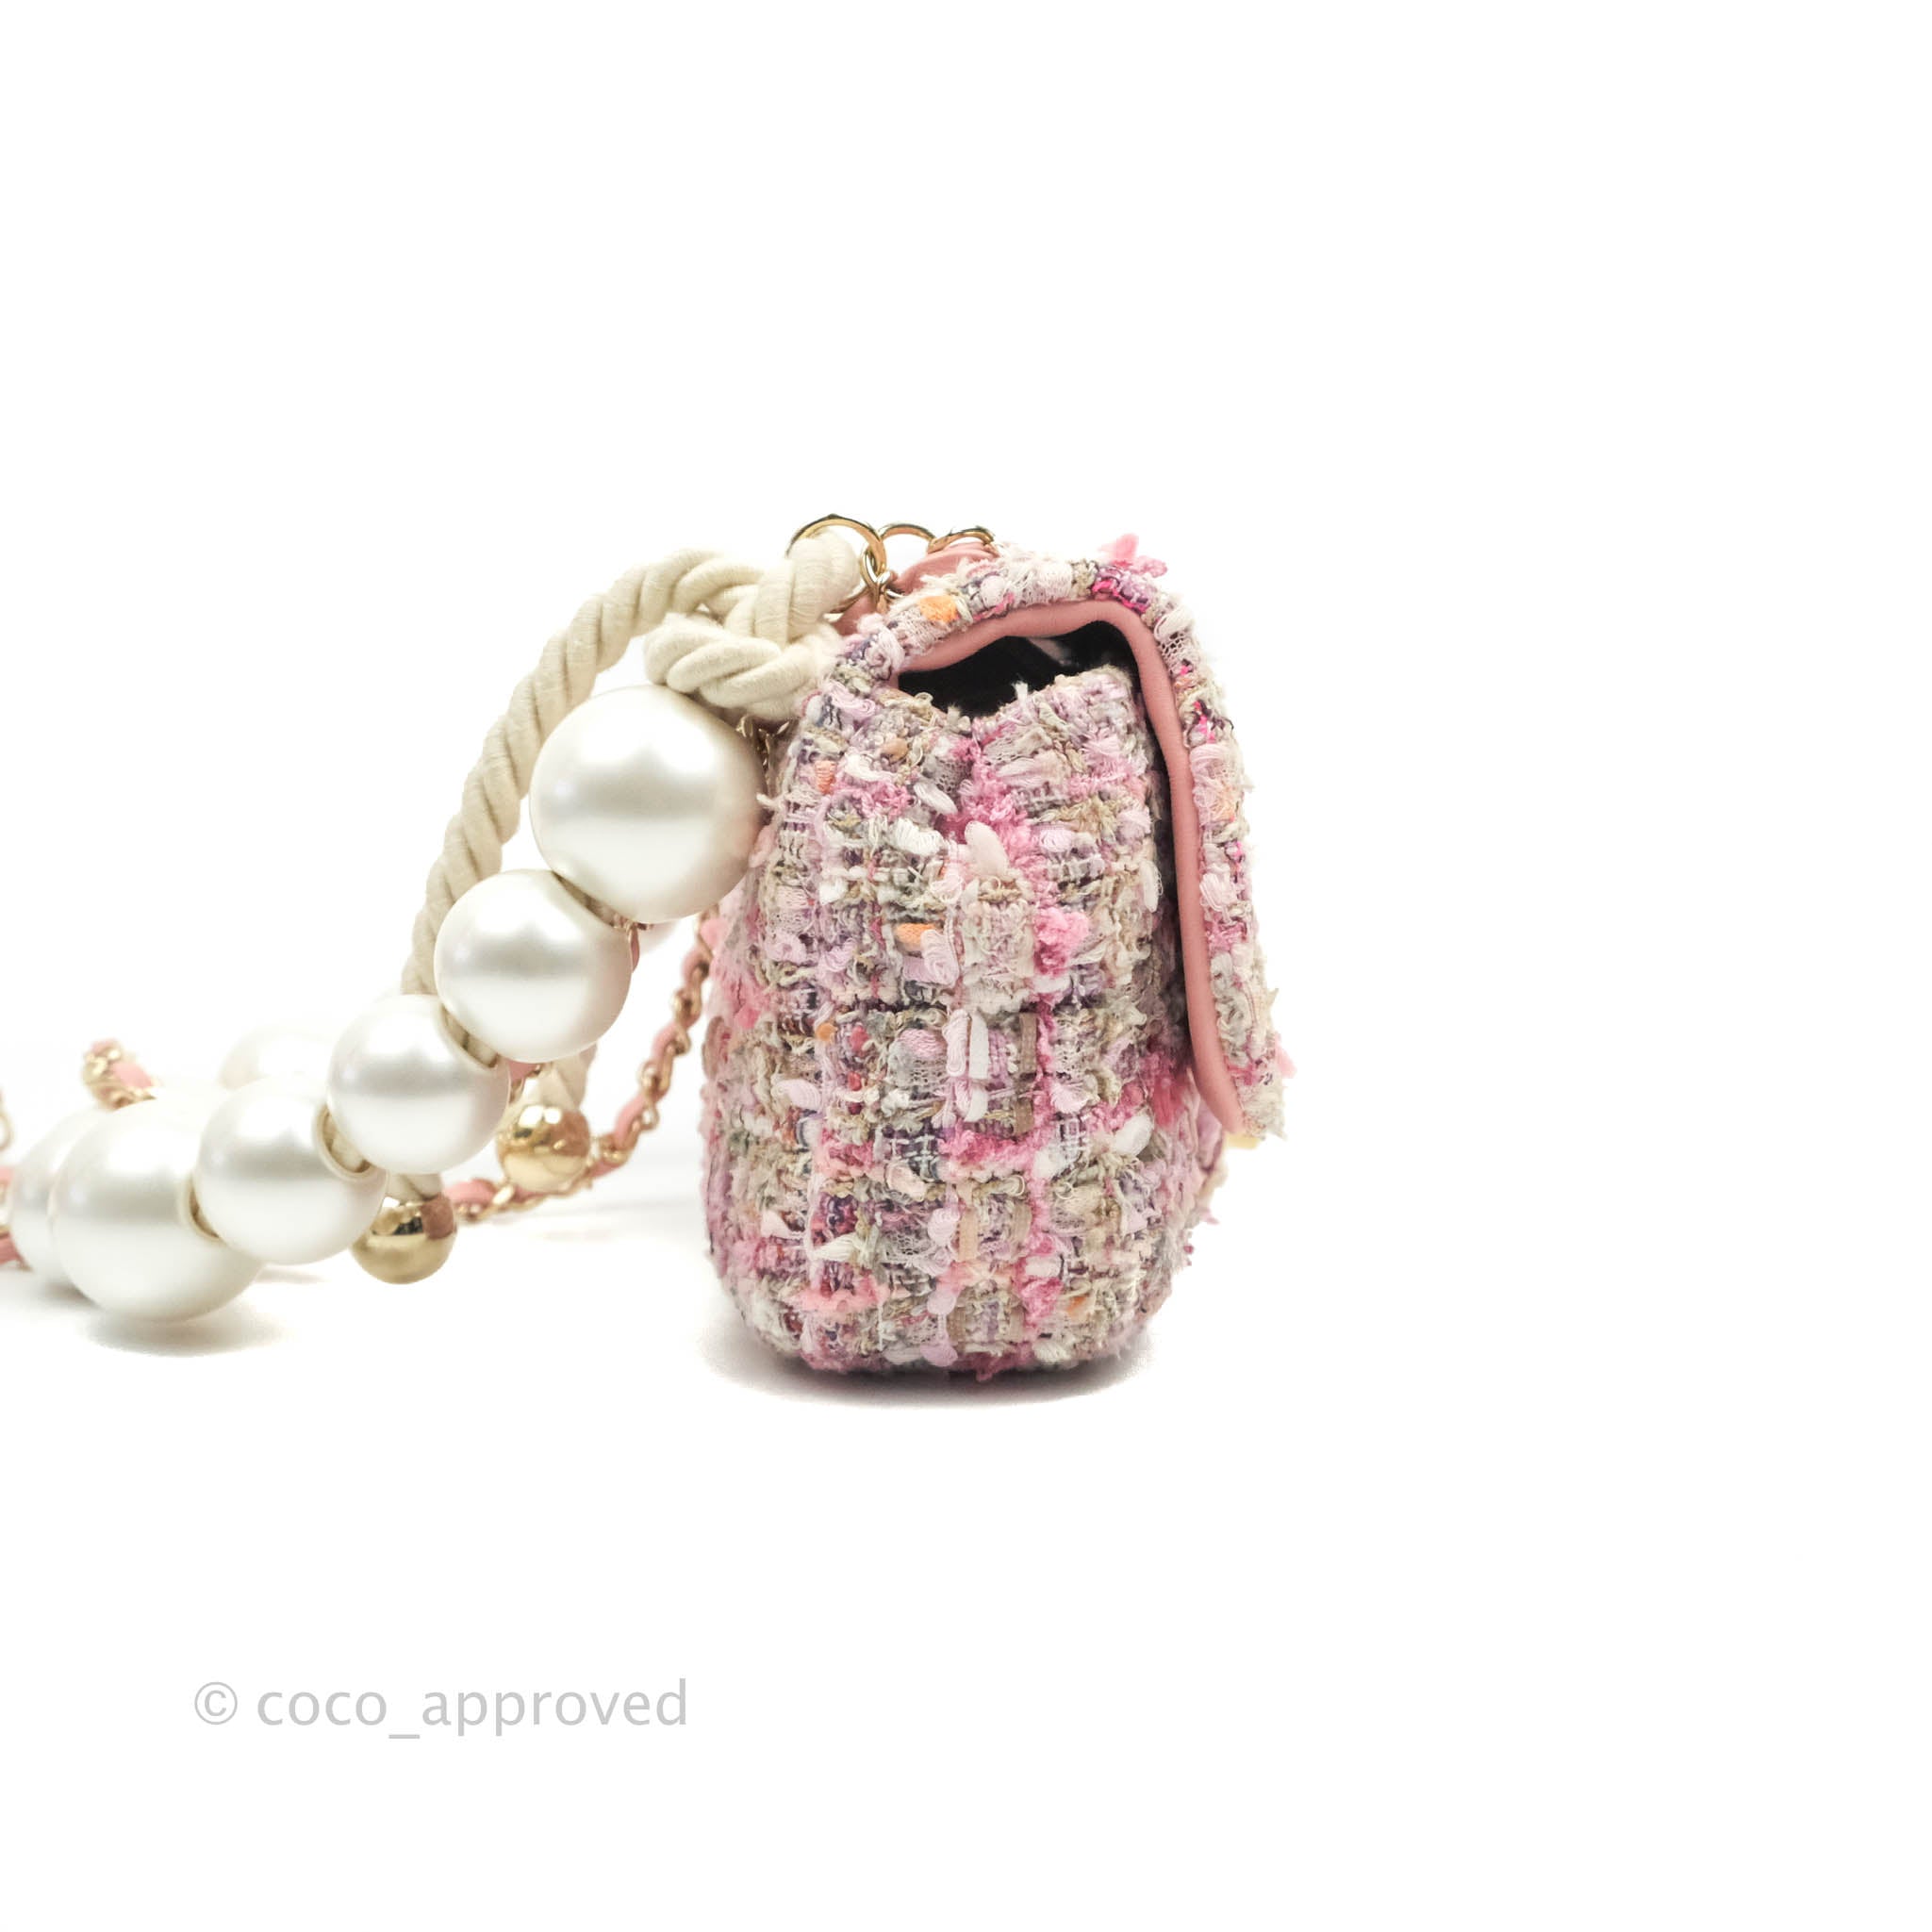 Chanel Pink Tweed Flap Bag With Large Pearl Handle - SS19 Collection